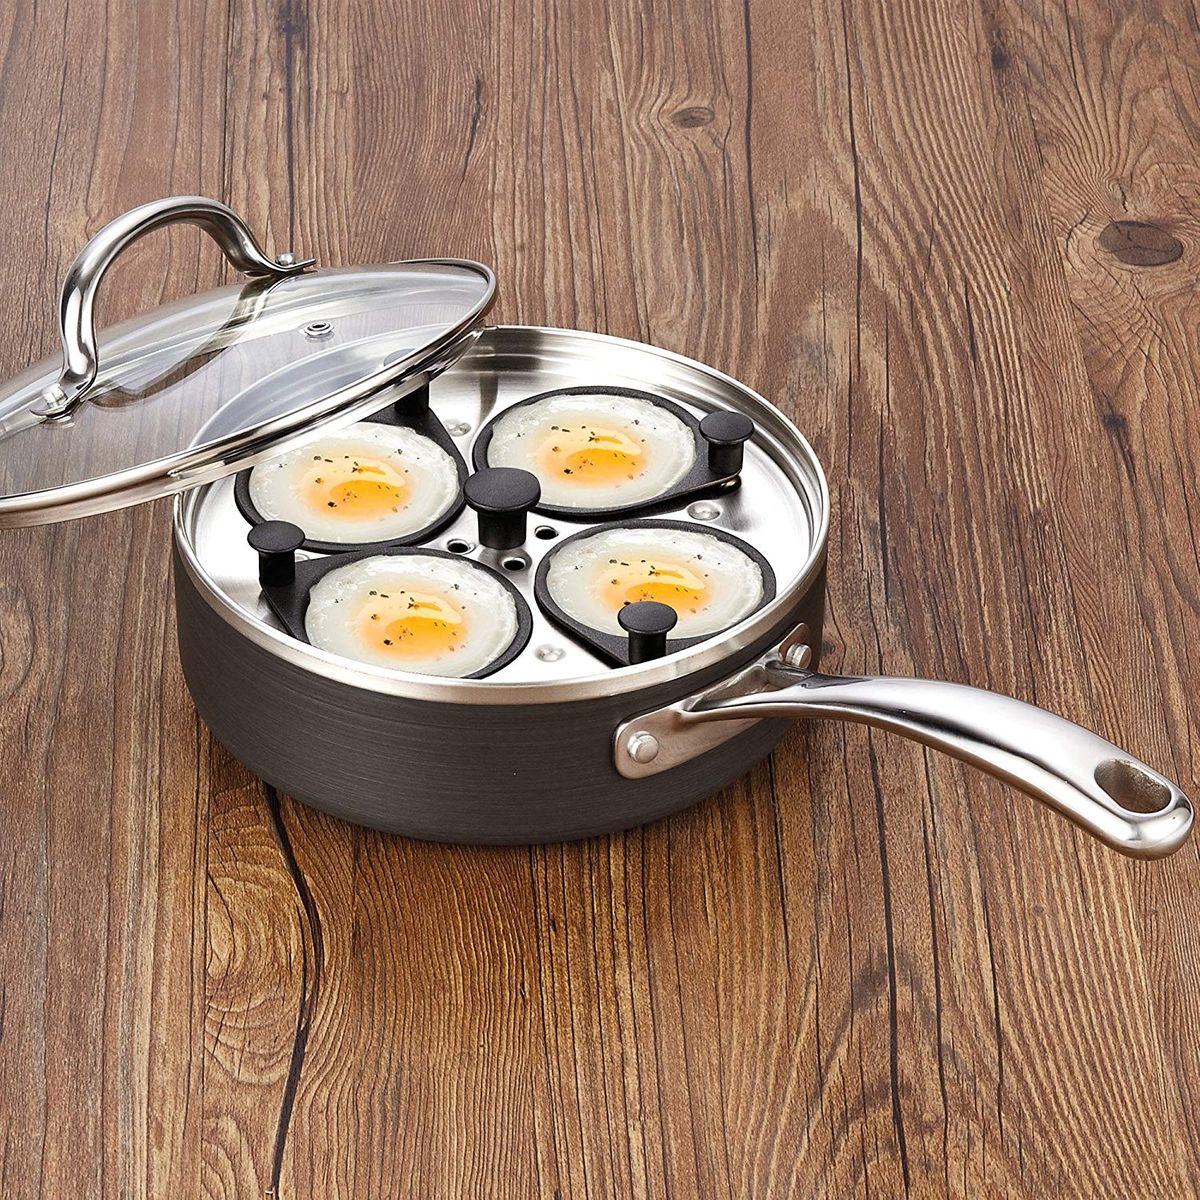 Perfect Poached Egg Maker CozyKit 2 Cups Egg Poacher Pan Stainless Steel Poached Egg Cooker Induction Cooktop Egg Poachers Cookware Set with 2 Nonstick Large Silicone Egg Poacher Cups